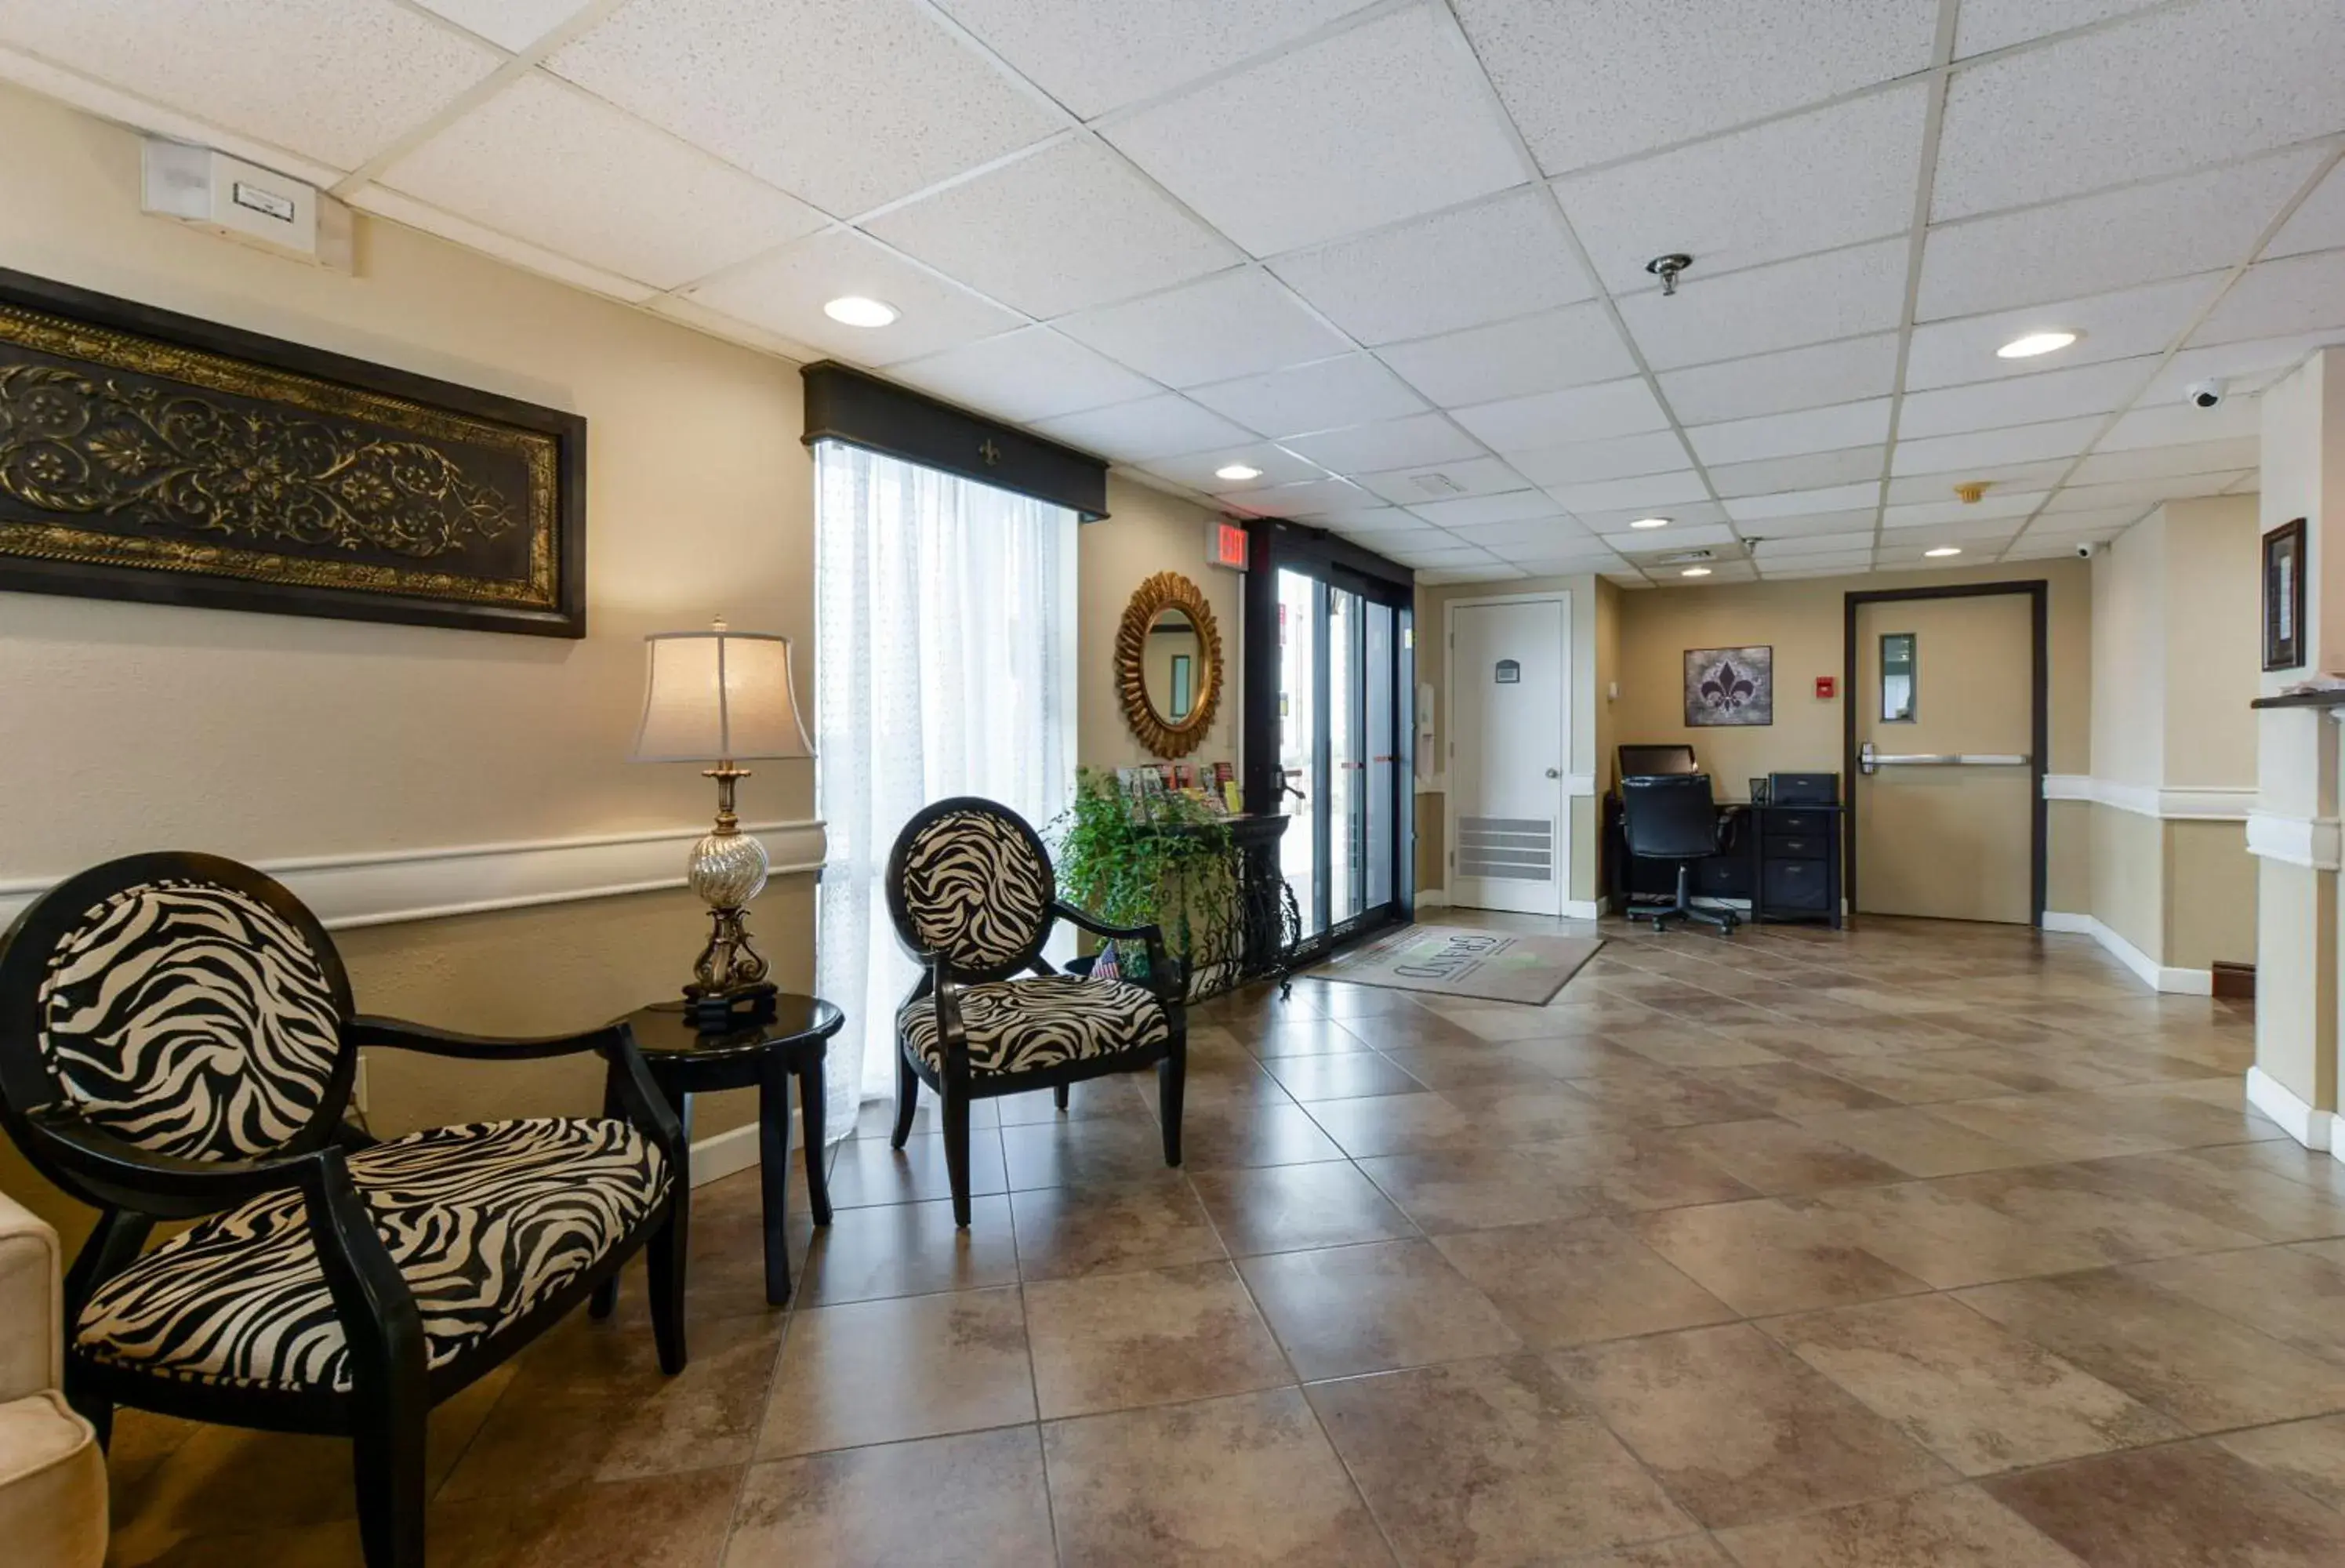 Lobby or reception, Lobby/Reception in Grand View Inn & Suites